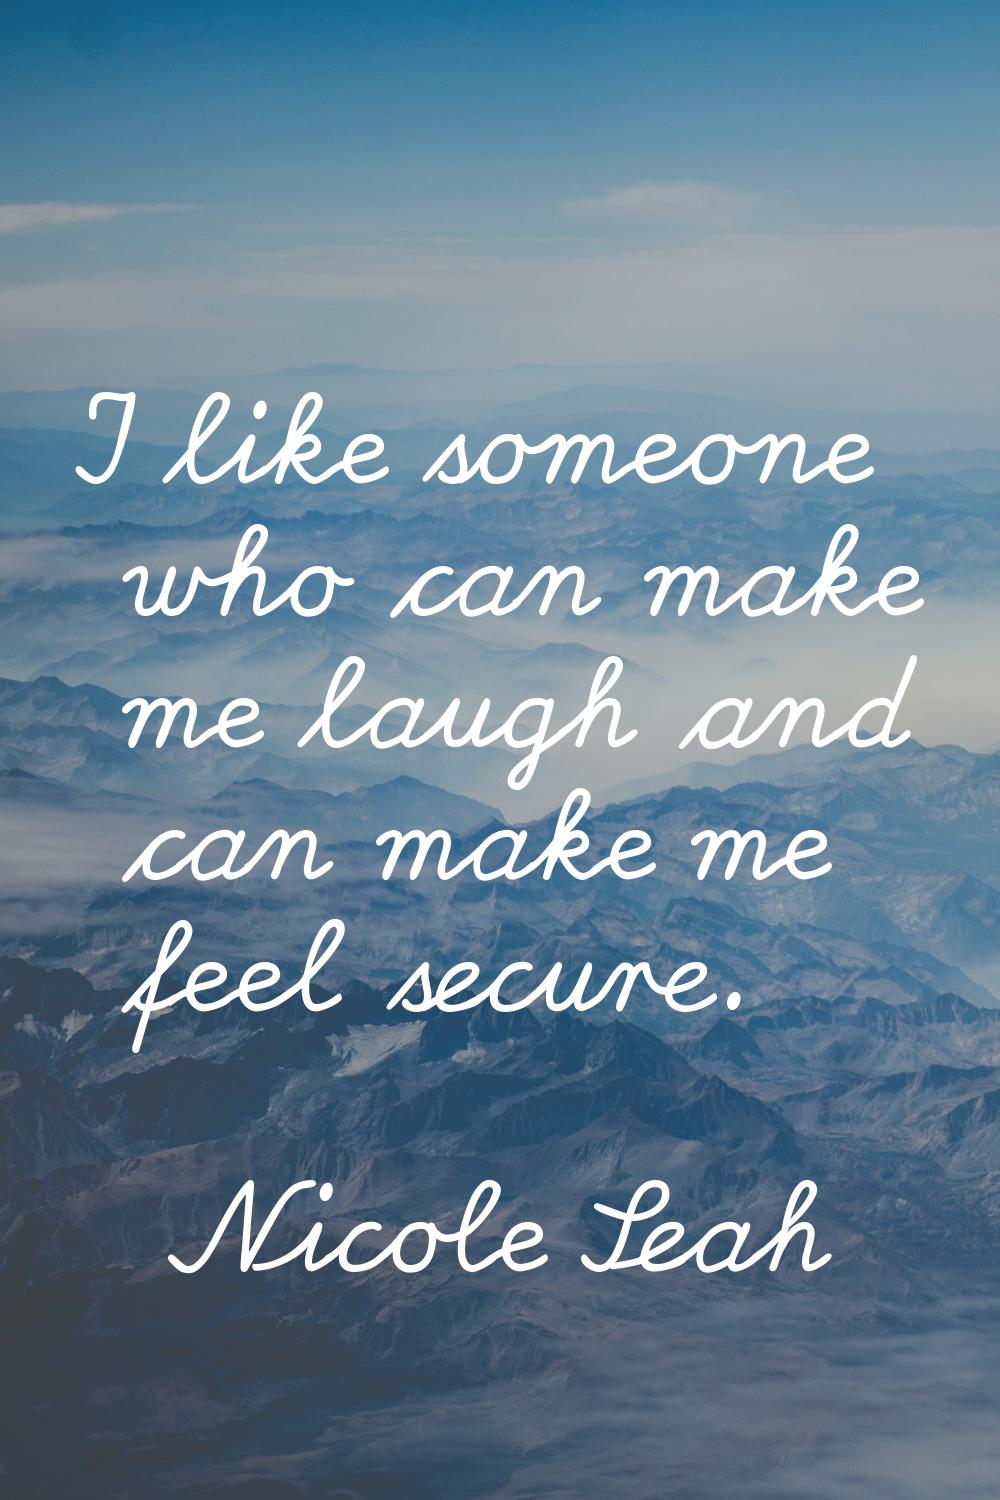 I like someone who can make me laugh and can make me feel secure.